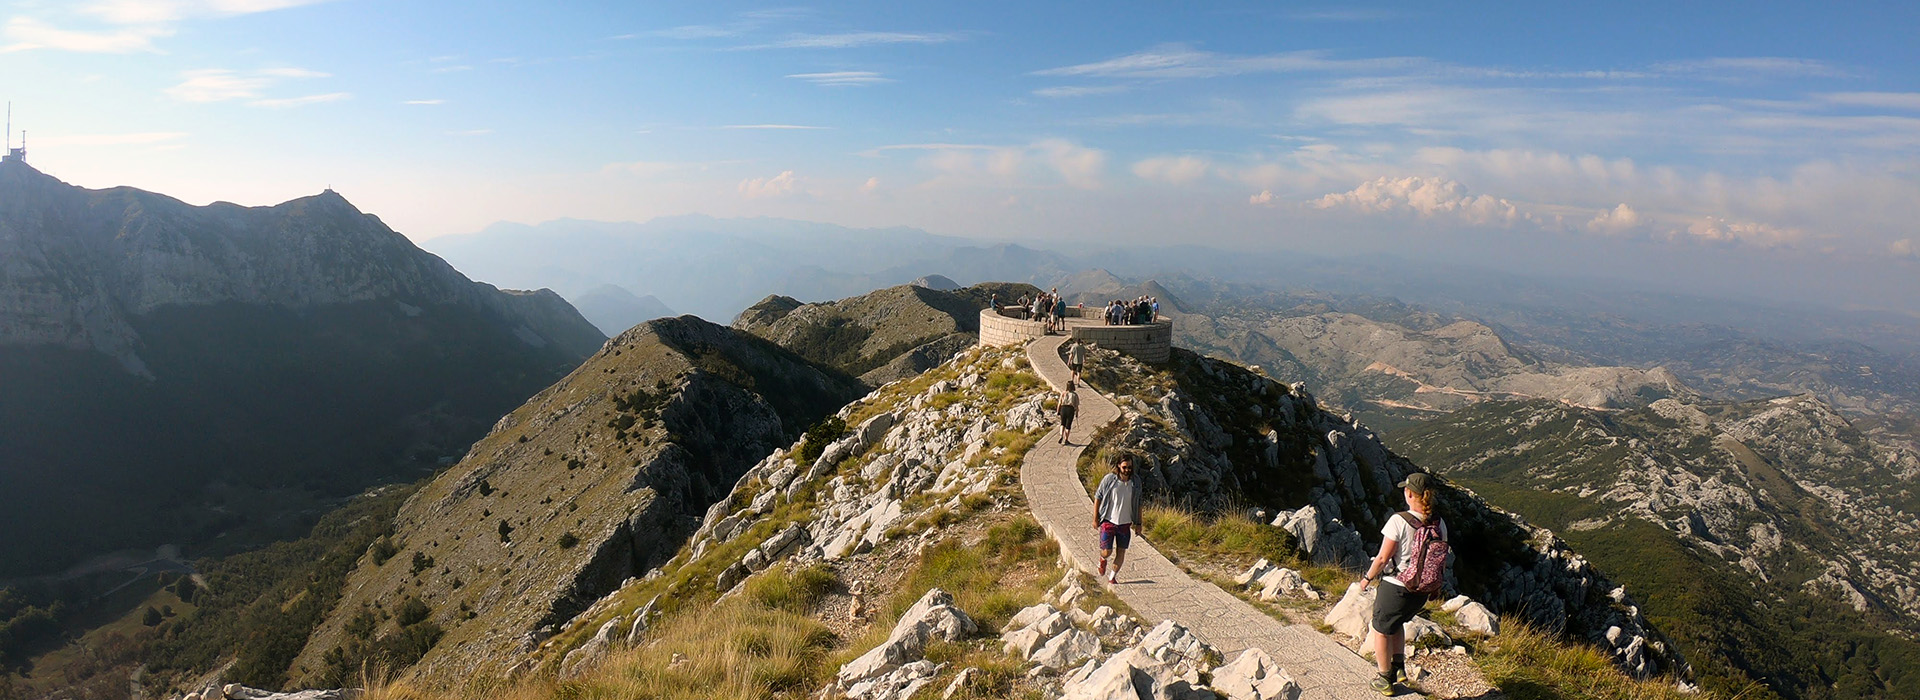 The Peaks of the Balkans walking guided holiday - Lovcen plateau